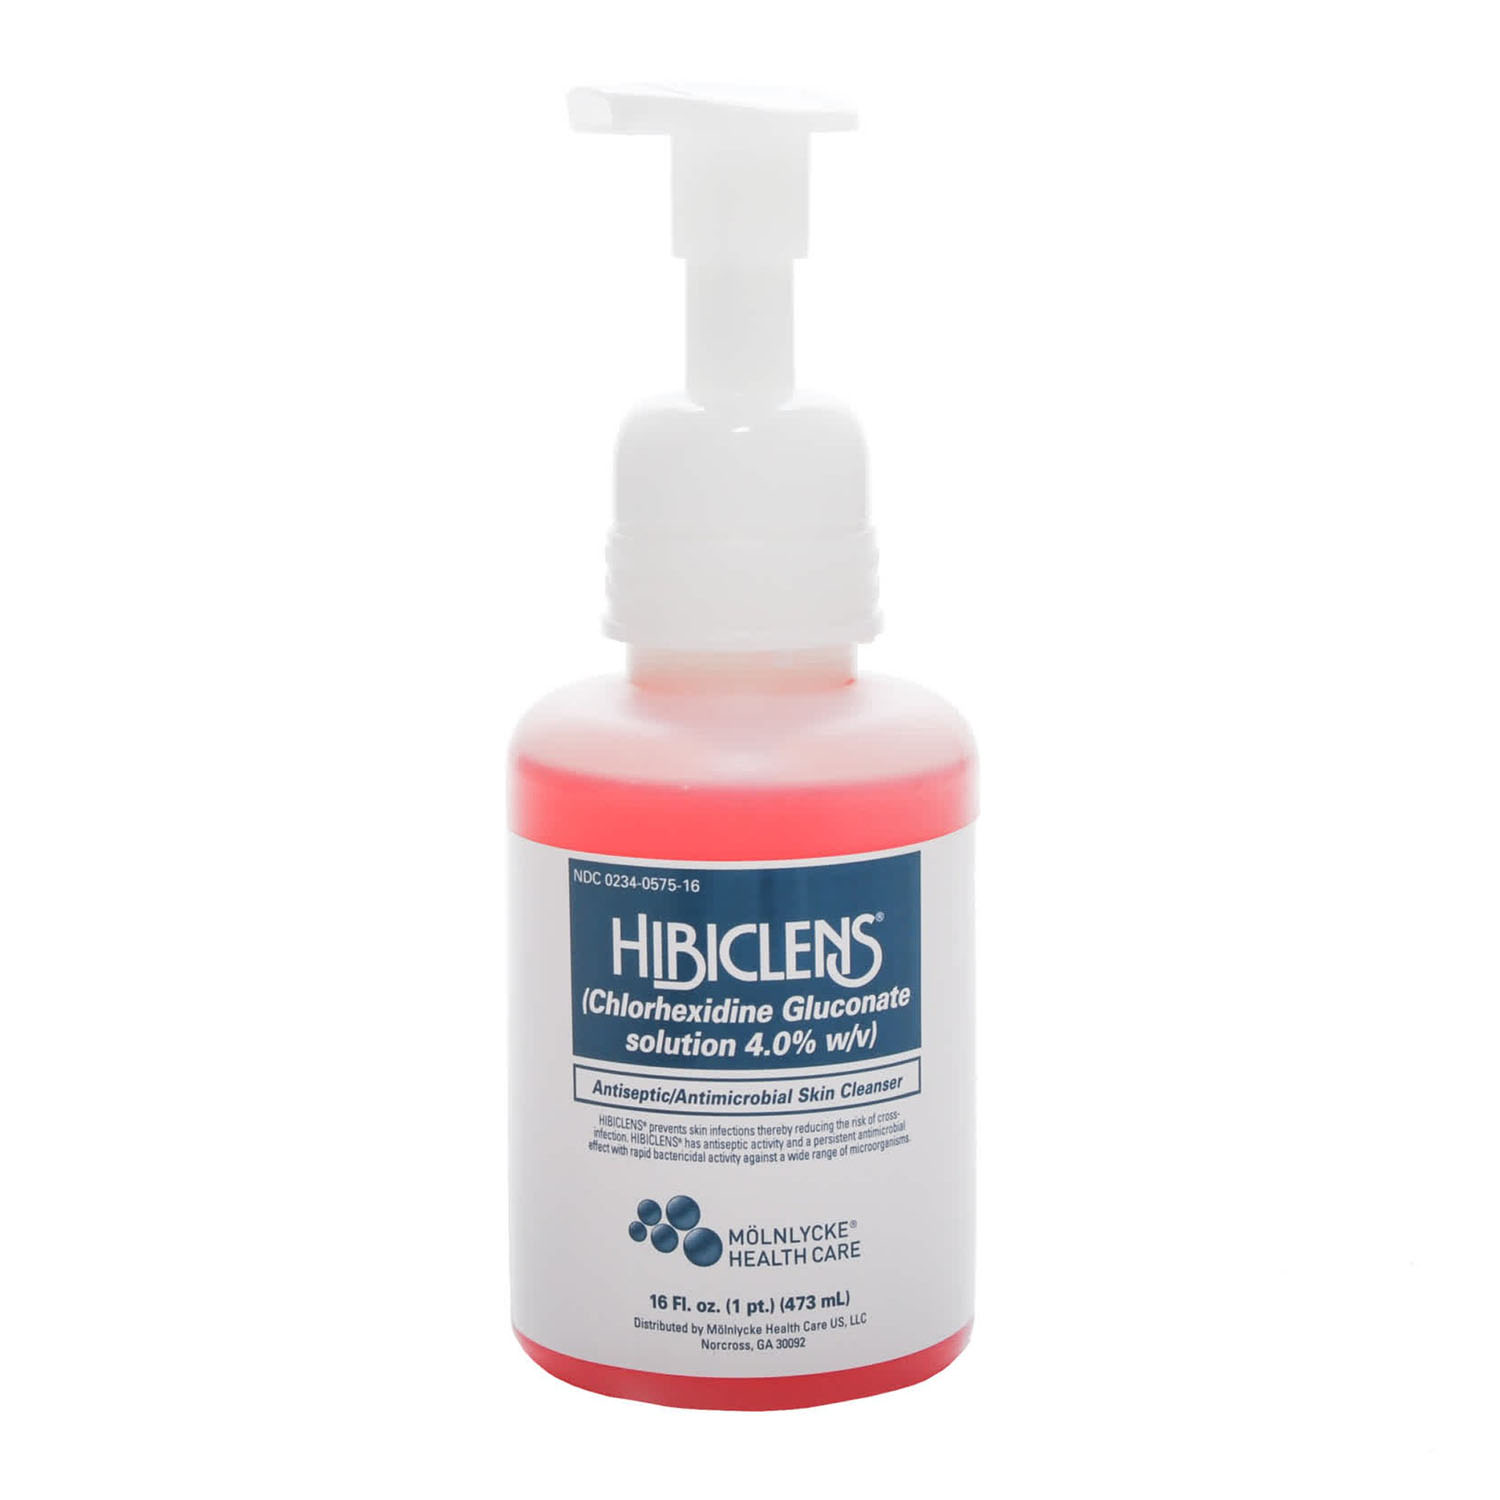 MOLNLYCKE HIBICLENS ANTISEPTIC ANTIMICROBIAL SKIN CLEANSER : 57516 CS        $141.99 Stocked